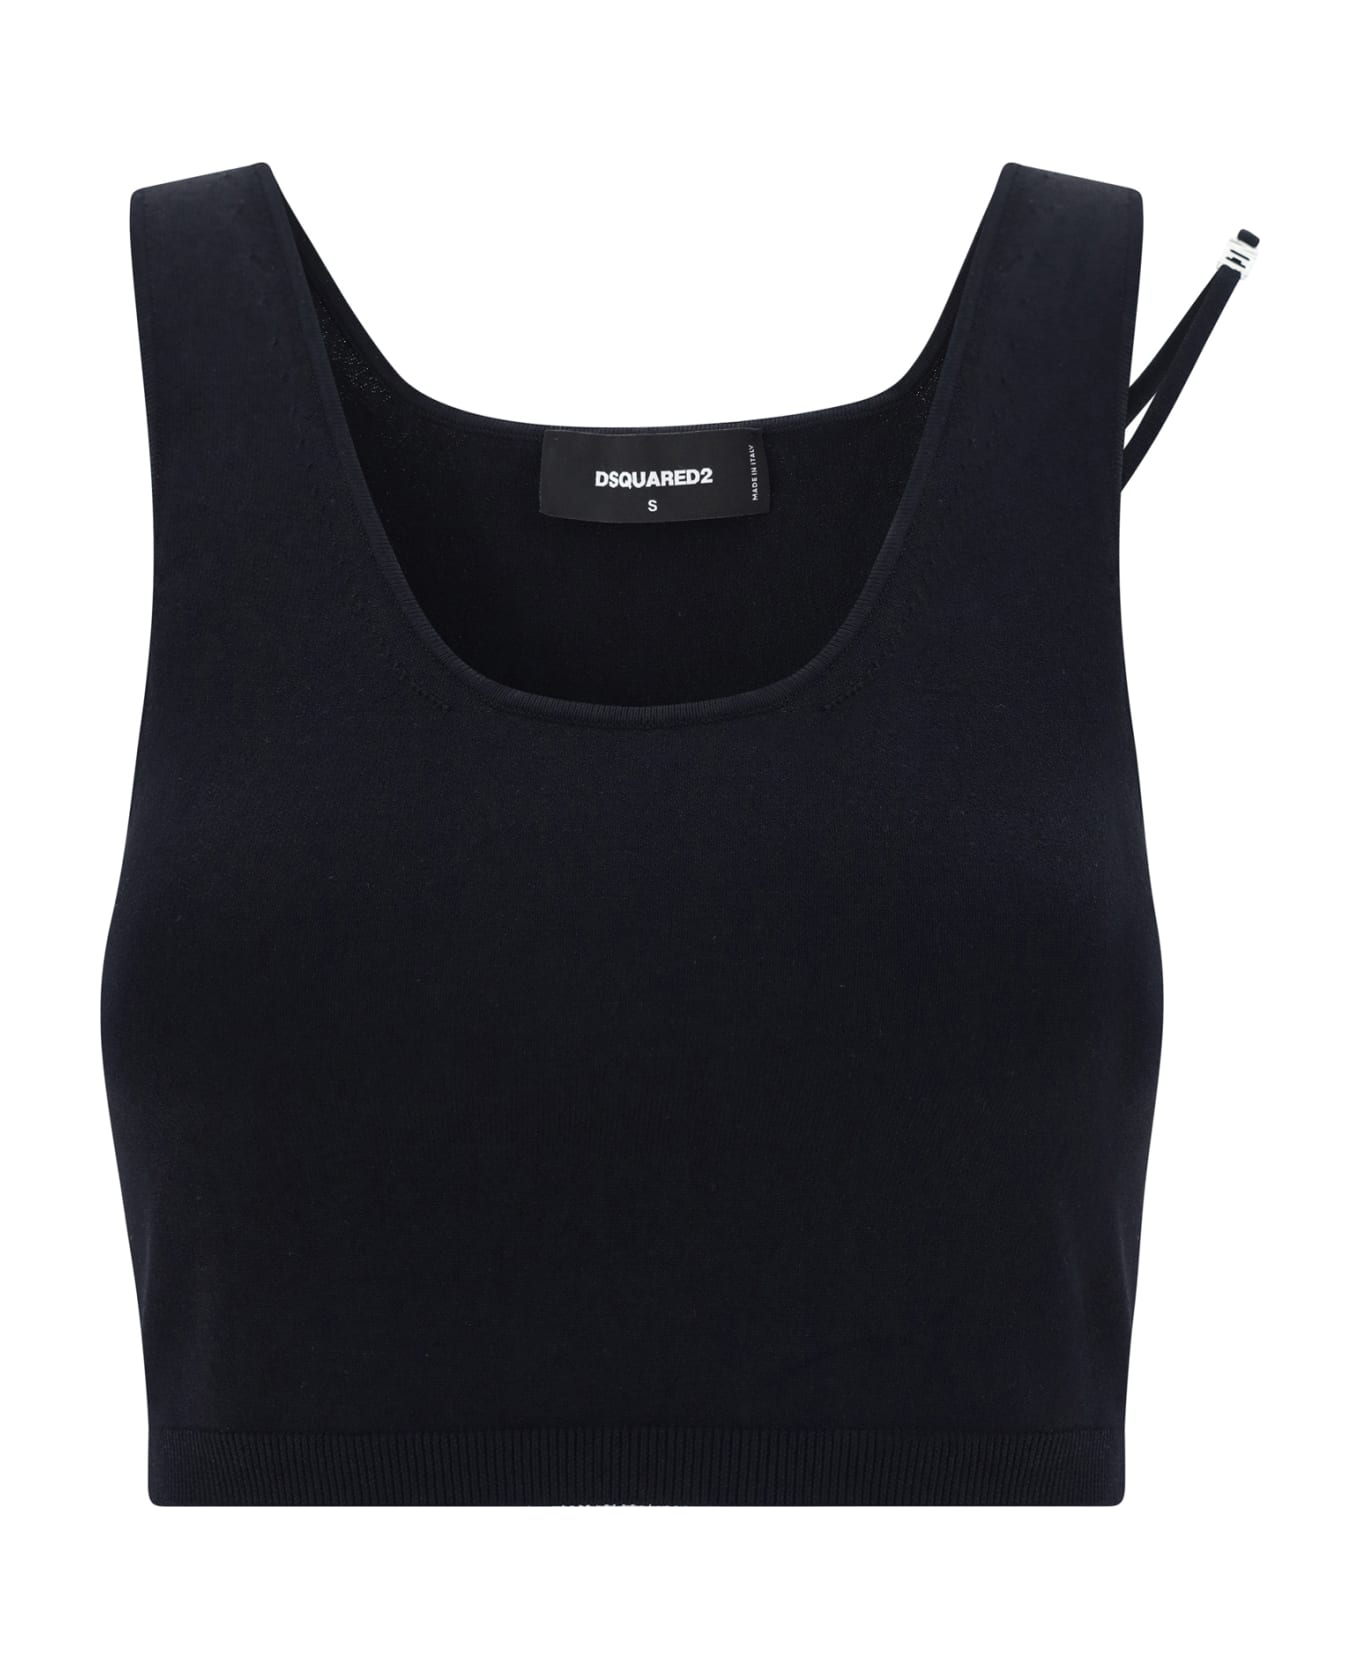 Dsquared2 Top - 900